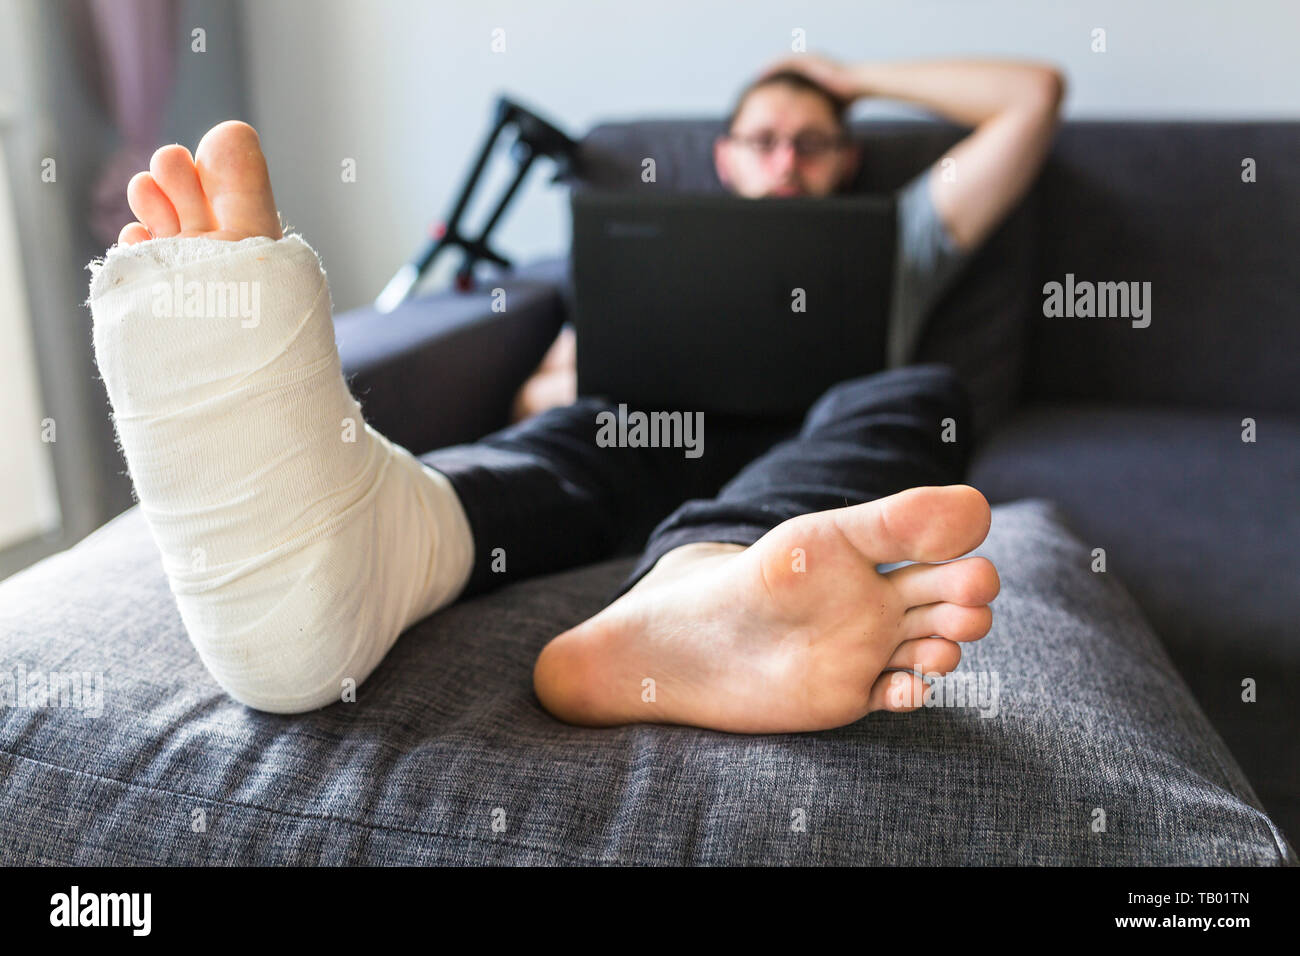 man with a broken leg is surfing the internet Stock Photo